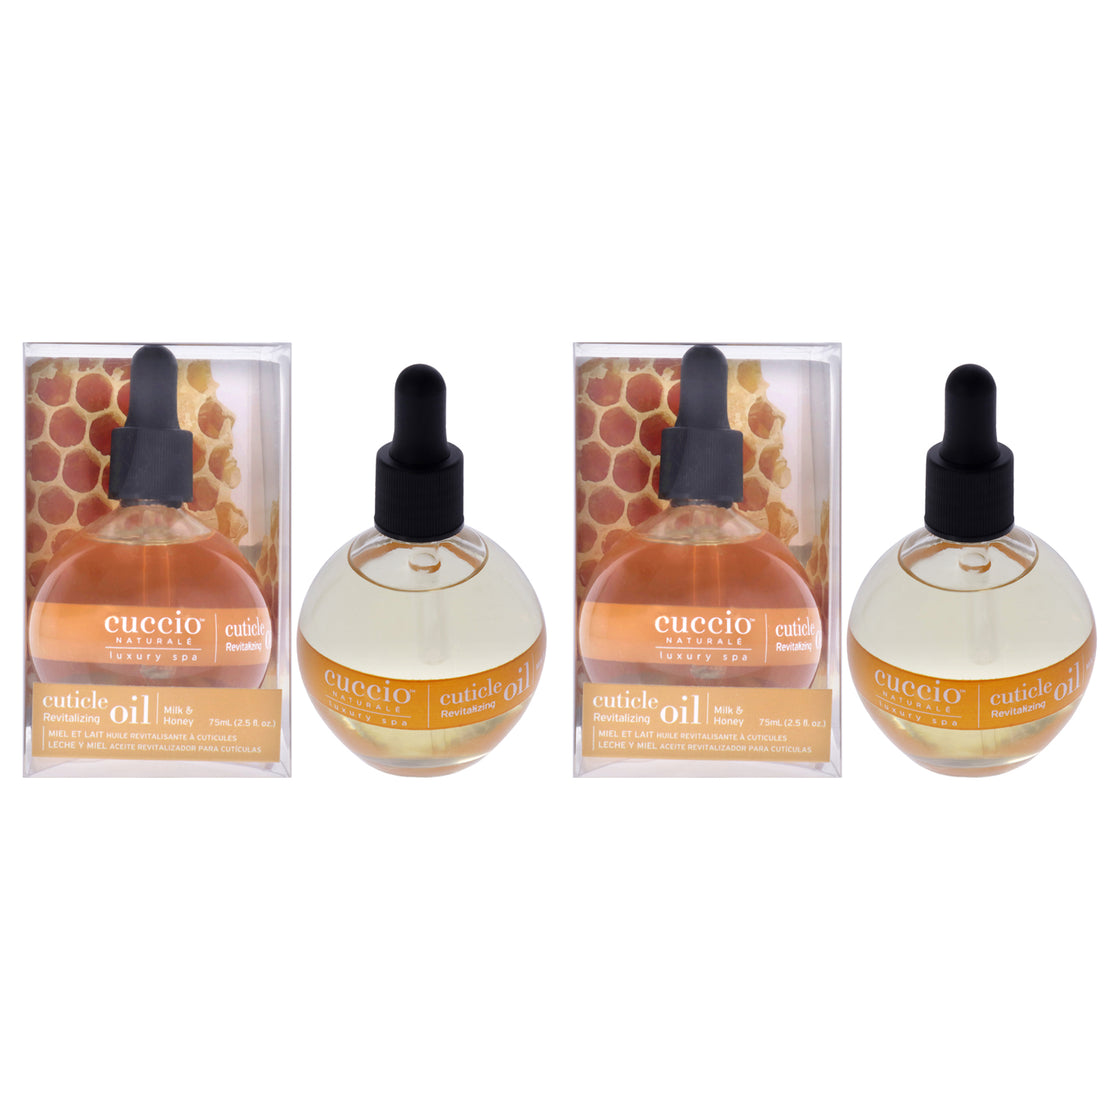 Cuticle Oil by Cuccio Naturale for Women - 2 x 2.5 oz Cuticle Oil - Pack of 2